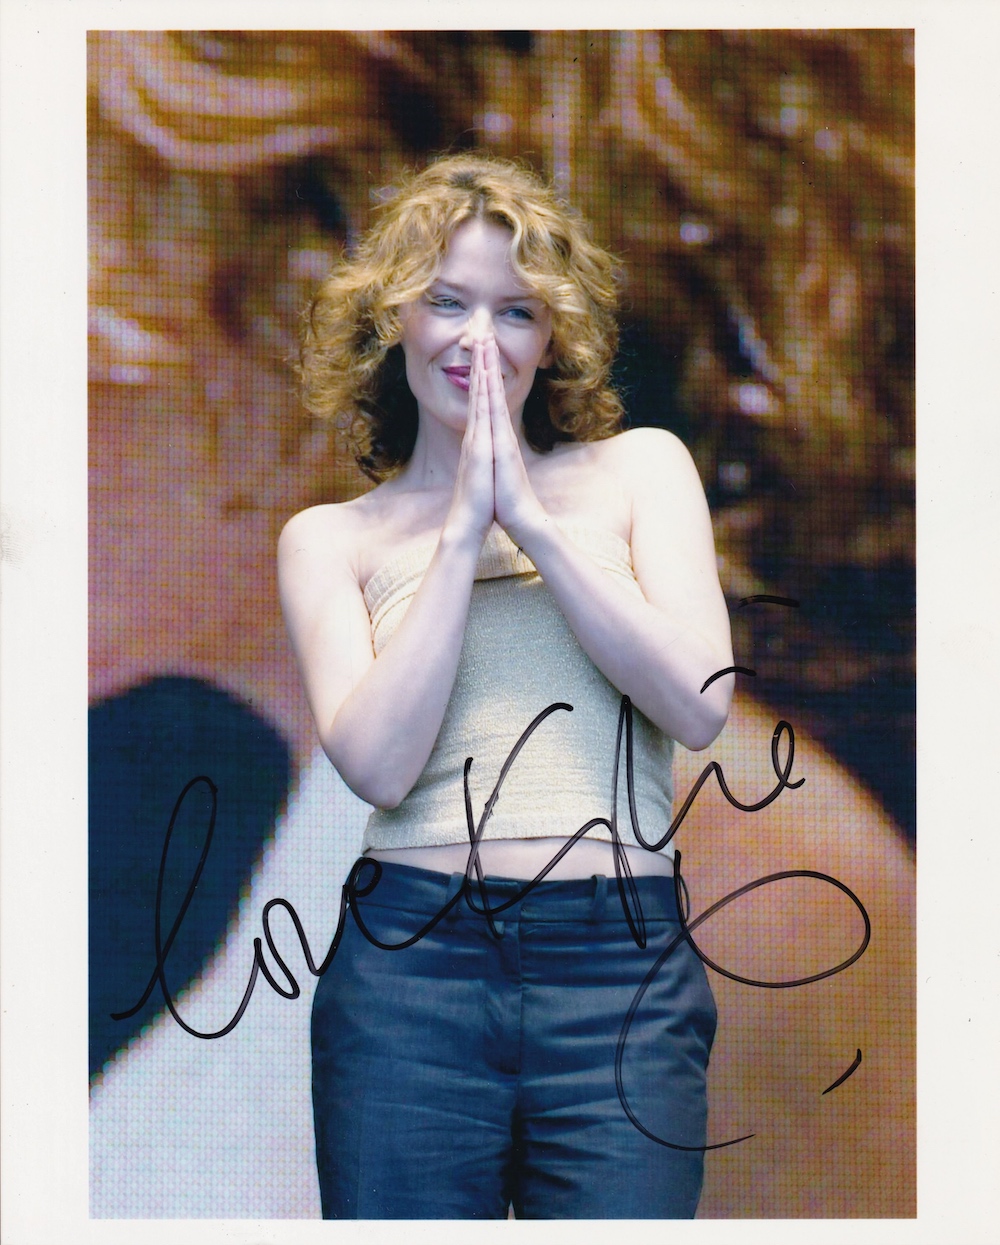 Kylie Minogue, Chart Topping Singer Actress, 10x8 inch Signed Photo. Good condition. All